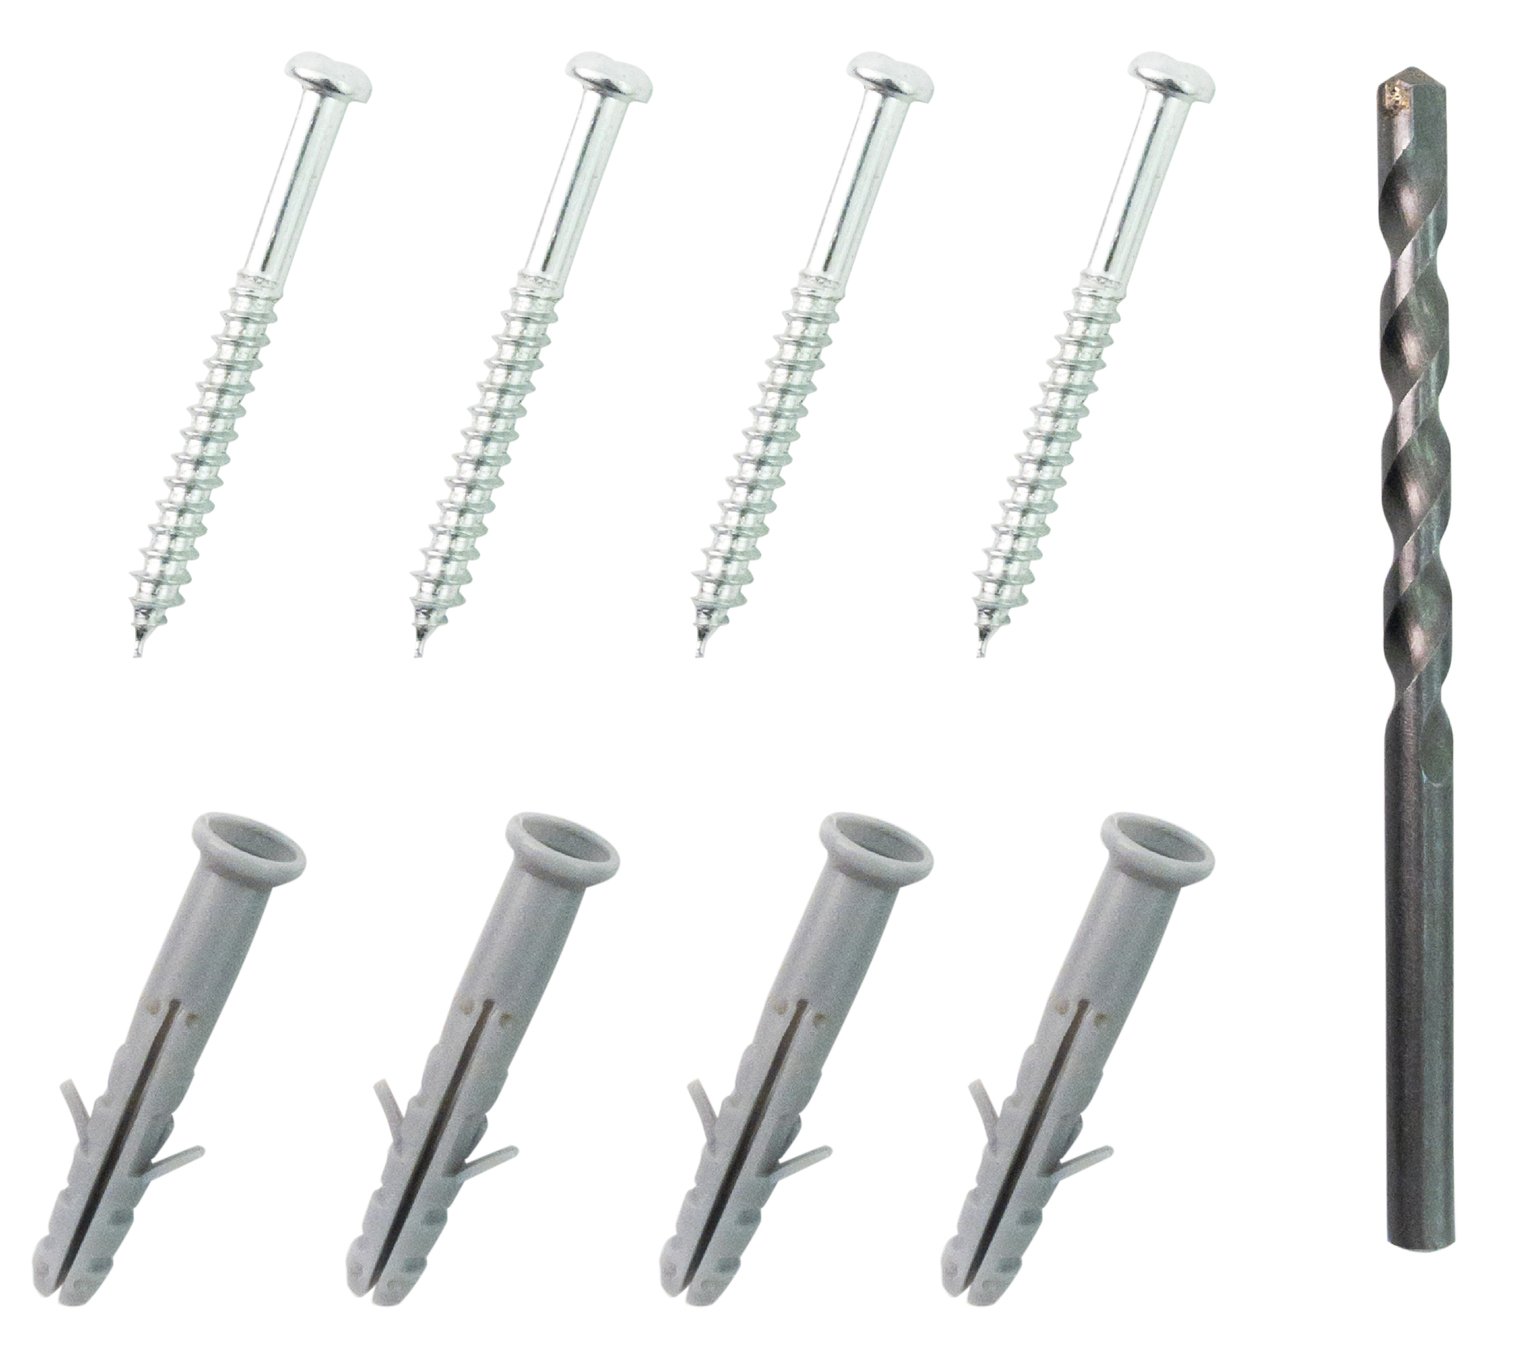 AVF Universal Solid and Stud Wall Fixing Kit Review